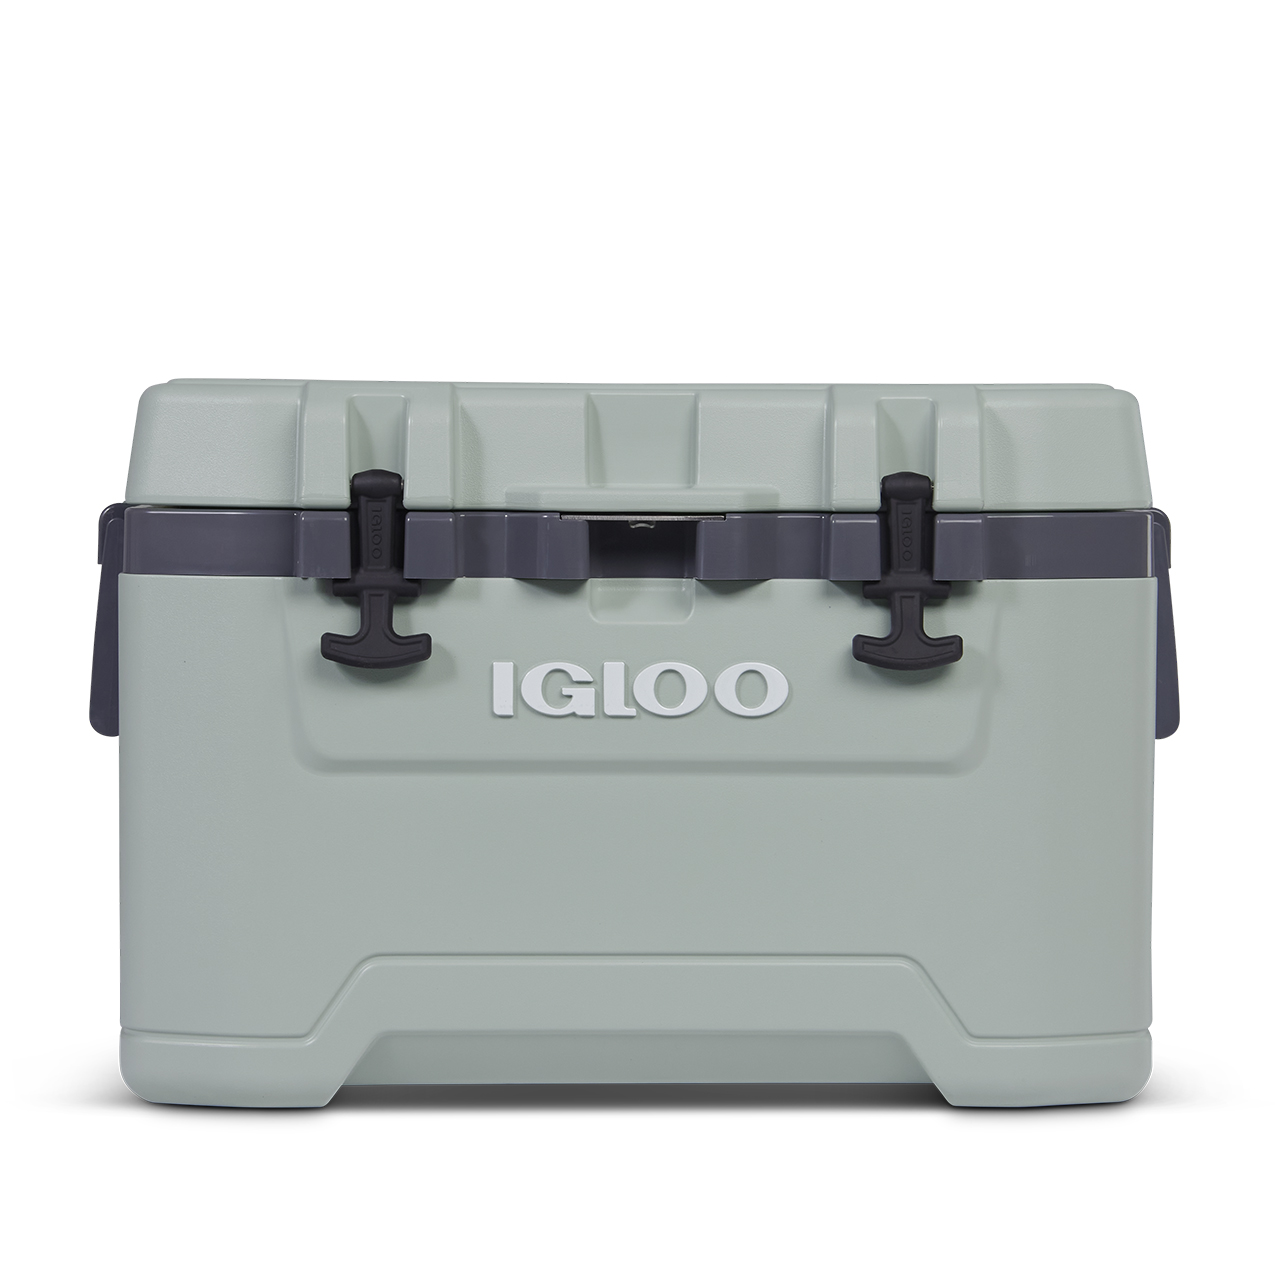 Igloo Overland 50 QT Ice Chest Cooler, Green - image 1 of 10